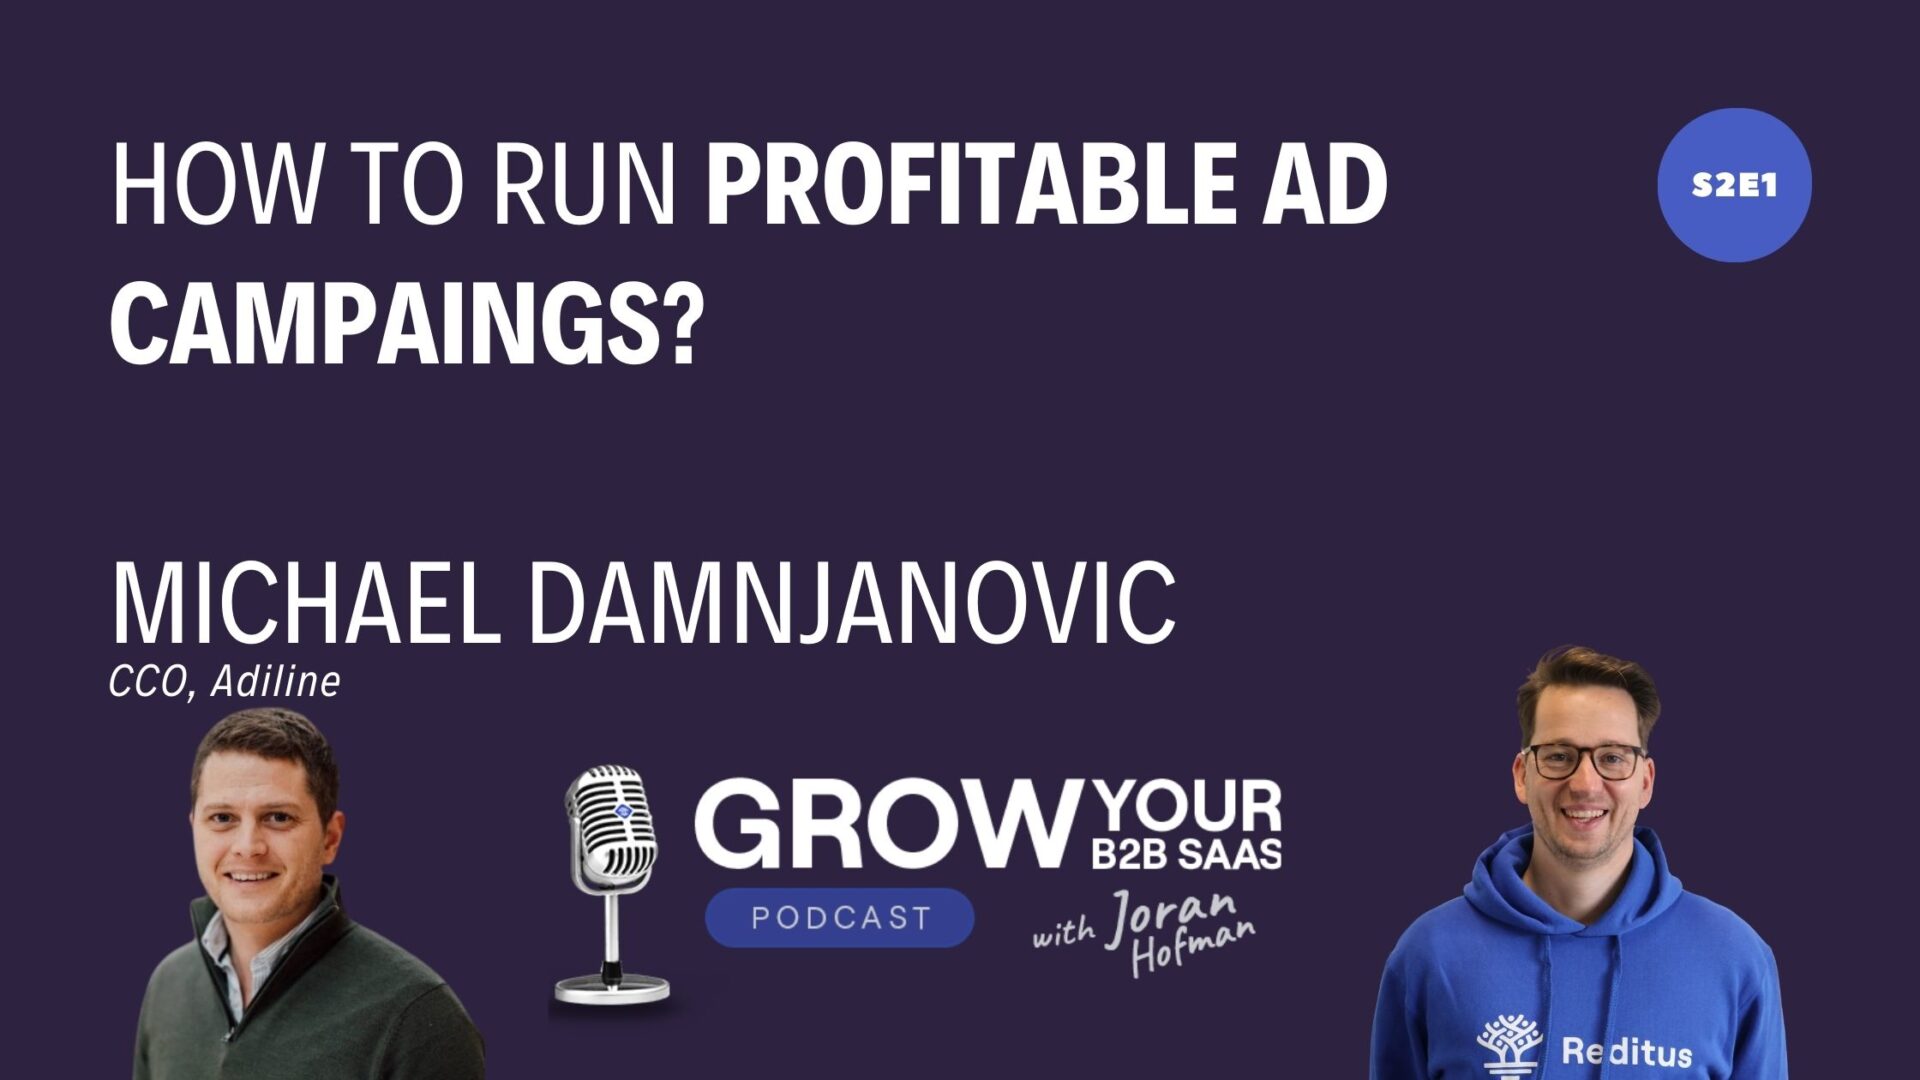 https://www.getreditus.com/podcast/s2e1-how-to-run-profitable-ad-campaigns-with-michael-damnjanovic/